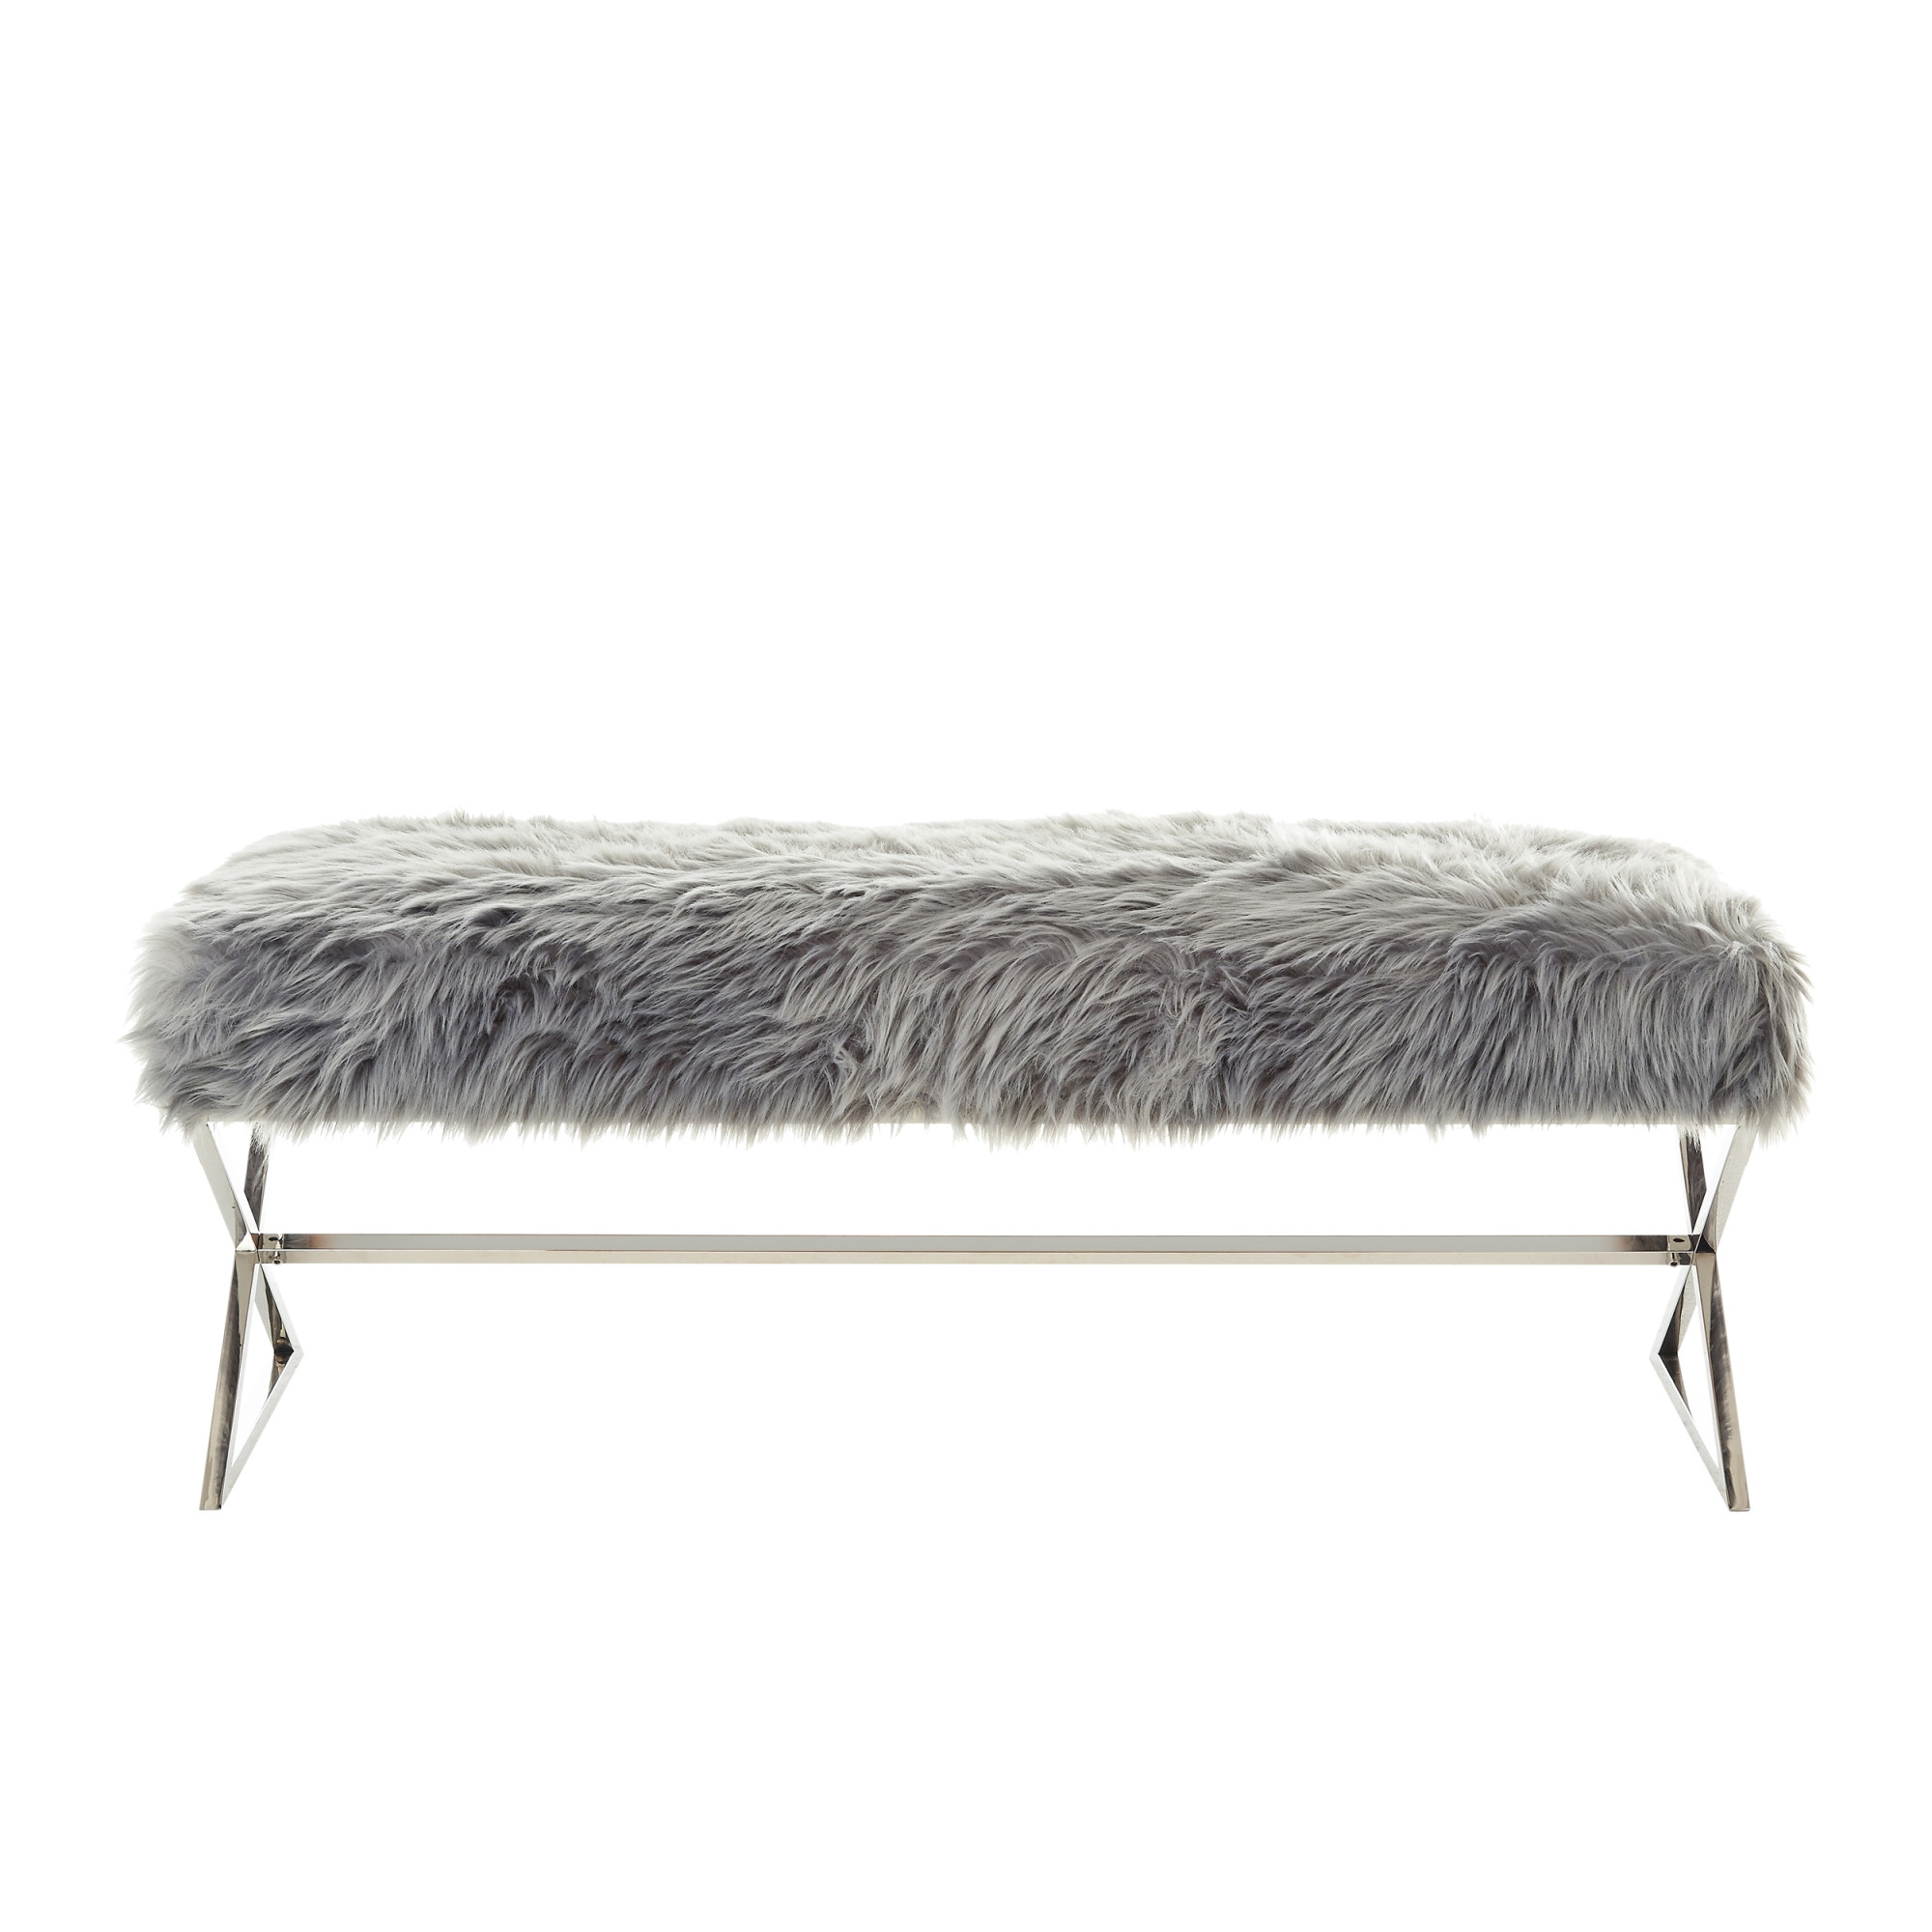 48" Gray And Silver Upholstered Faux Fur Bench-490873-1